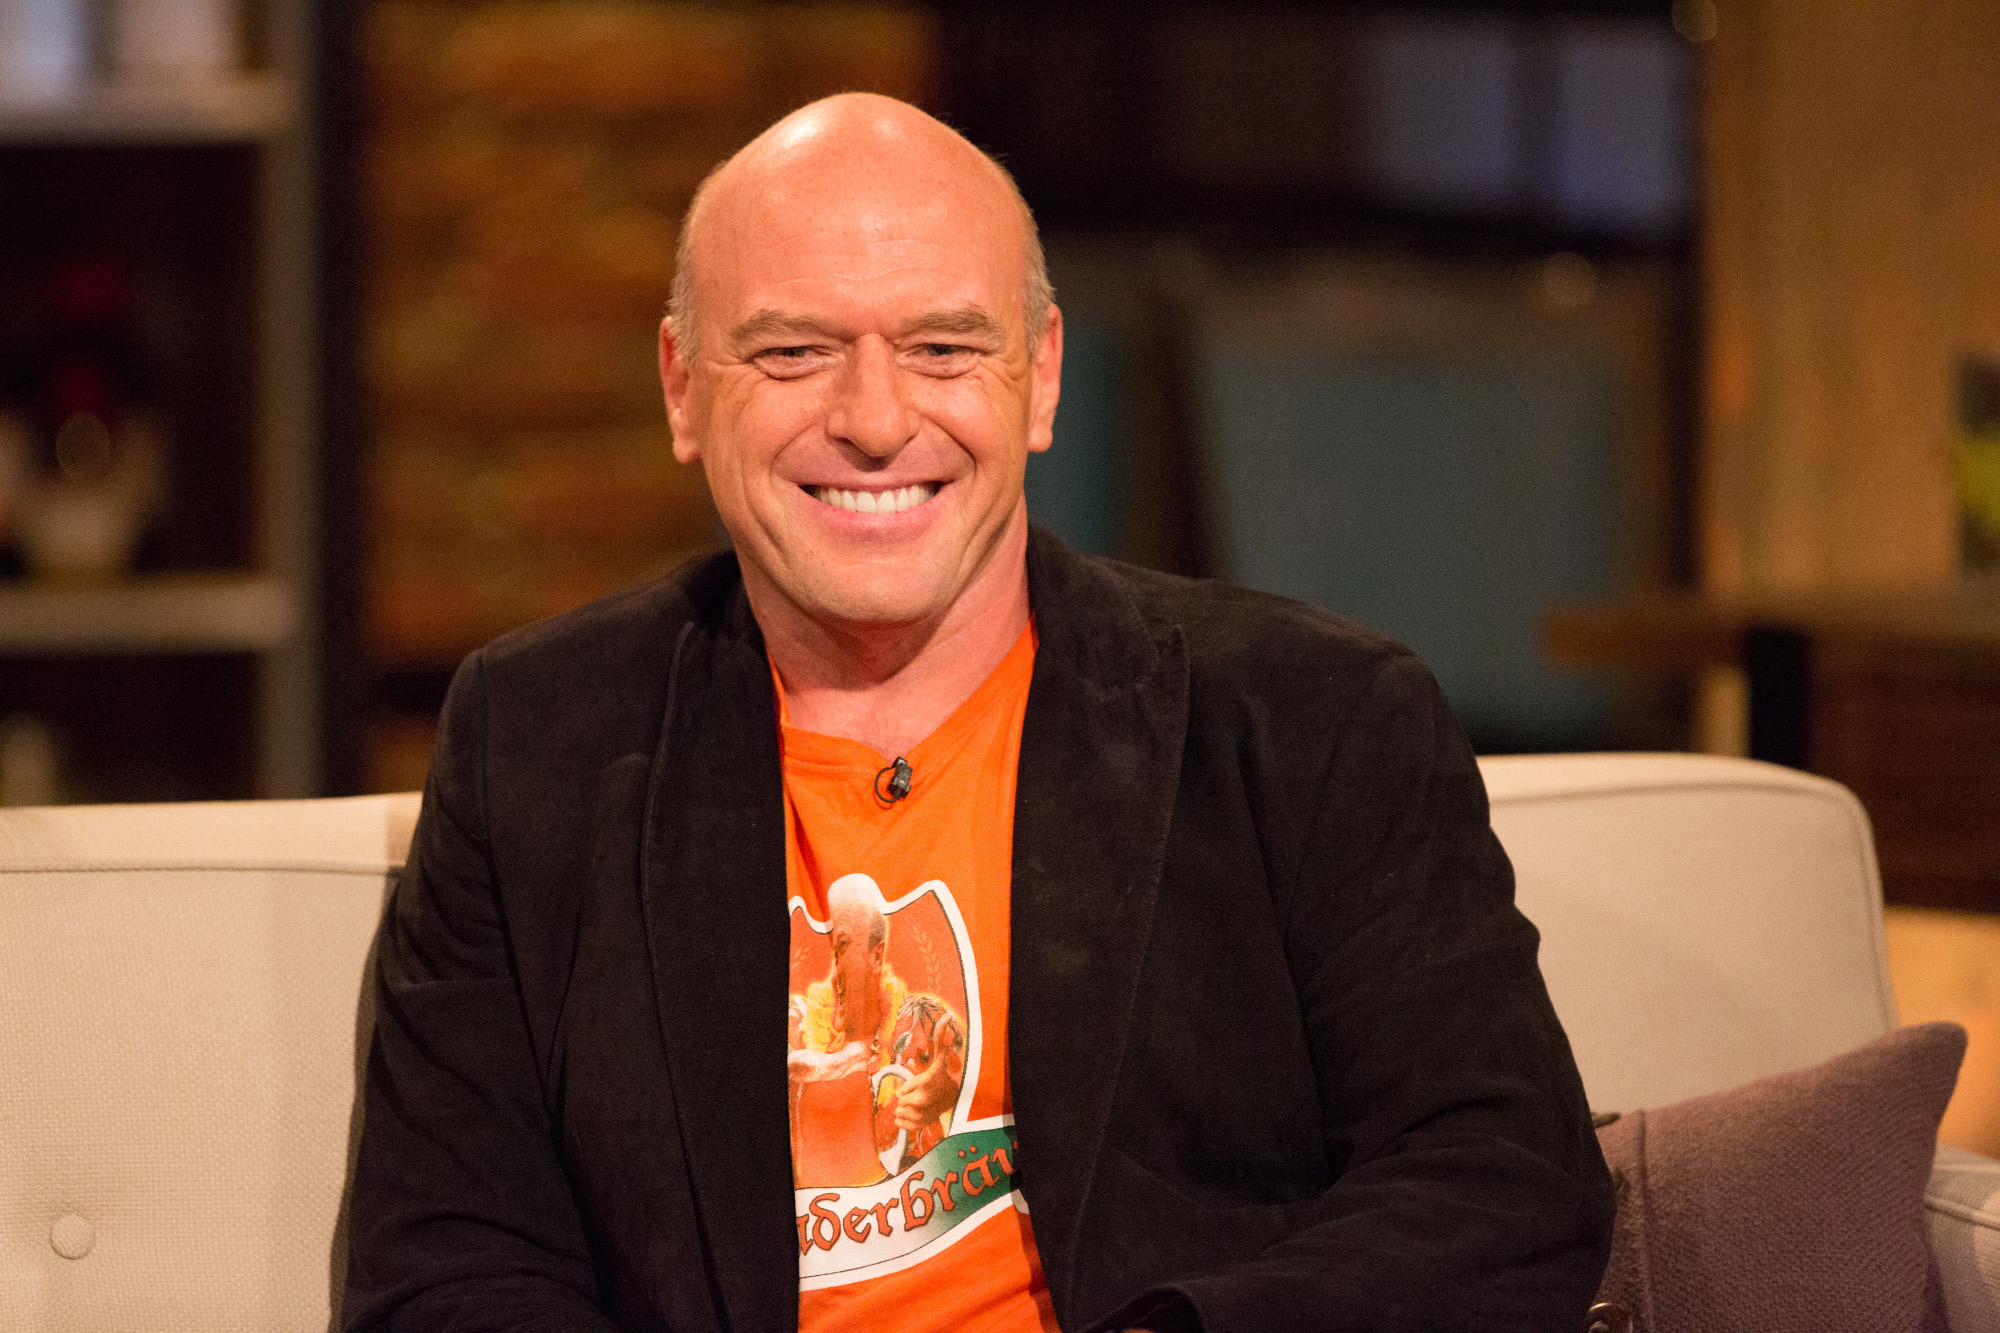 Dean Norris, who plays Hank Shrader from Season 1 to Season 5 of 'Breaking Bad.' He's on a talk show called 'Talking Bad' and wearing an orange shirt.